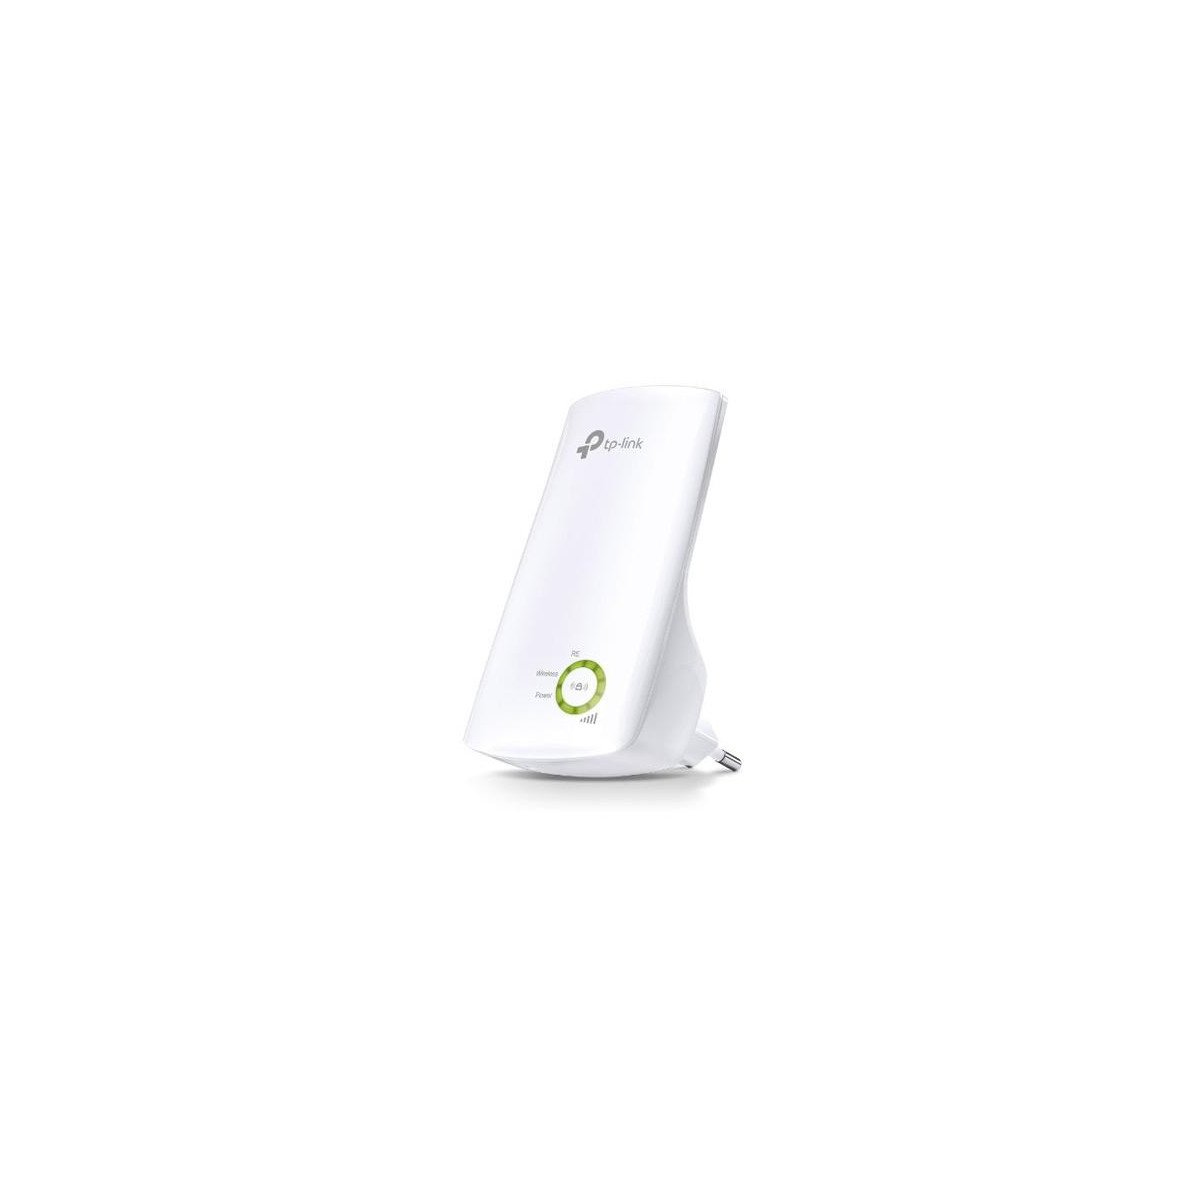 More about Repeater TP-LINK TL-WA854RE